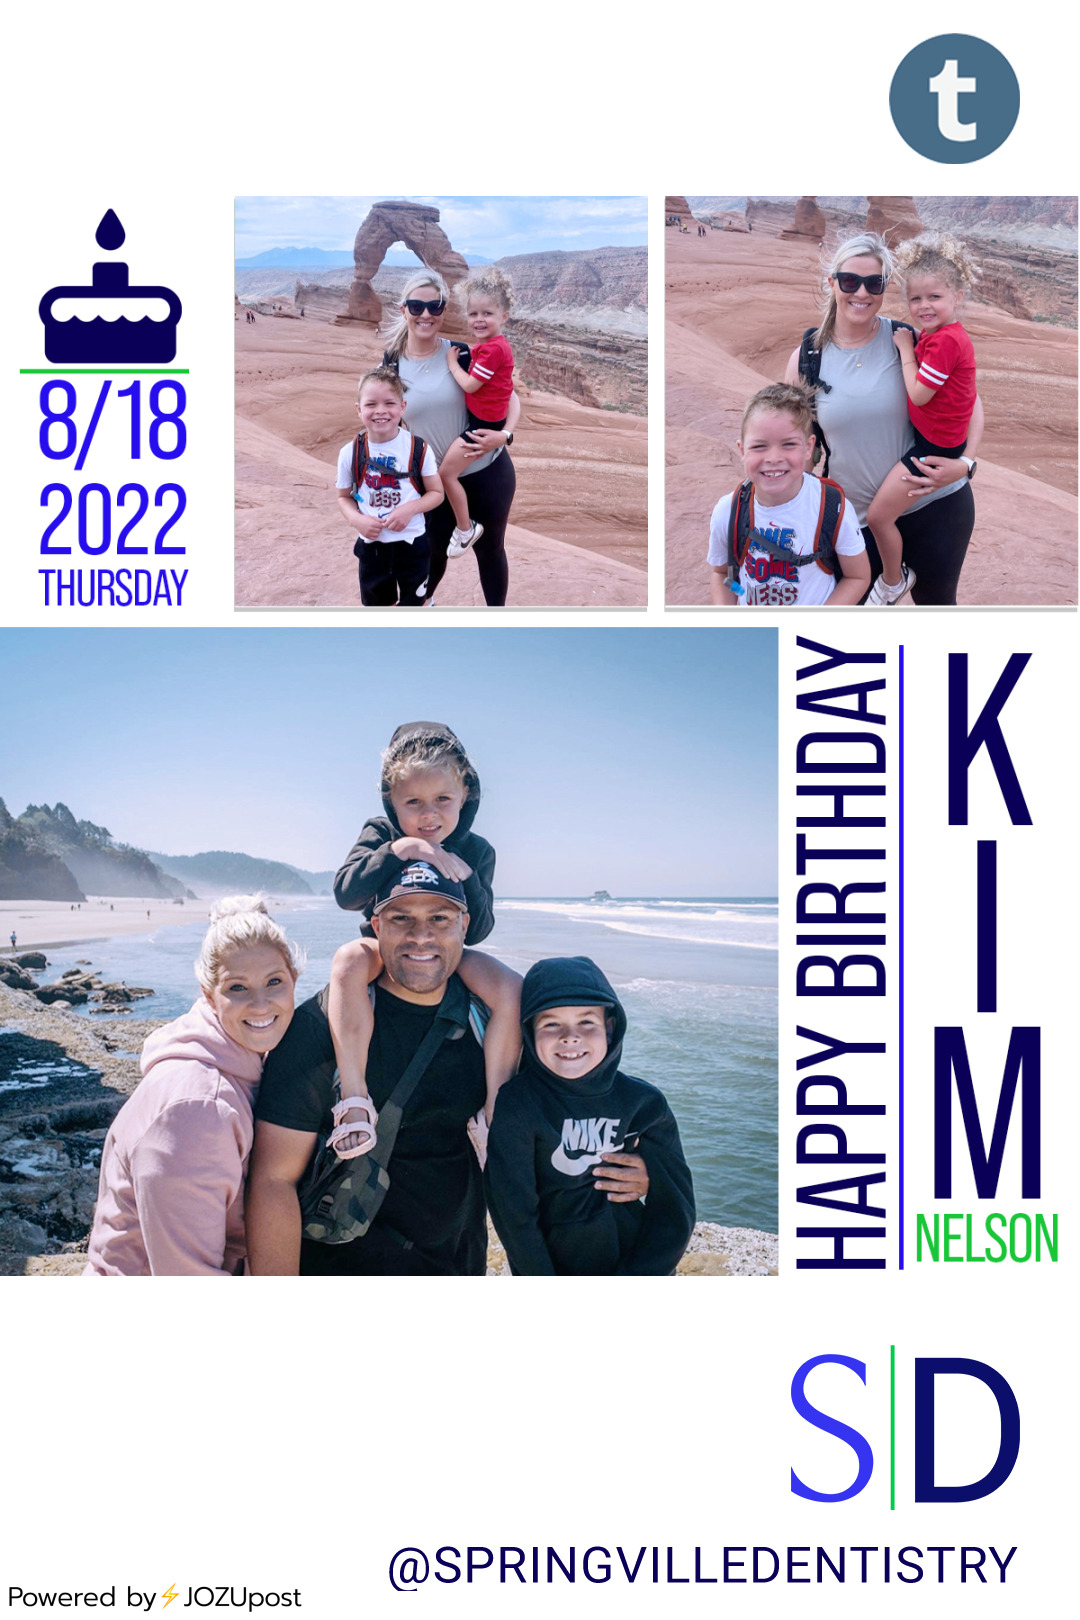 🎂🎈🥳 HAPPY BIRTHDAY KIM!!!!
Kim loves Diet Dr. Pepper and she is an Oregon Ducks fan! She always has the CUTEST SHOES 😍😍 Kim is an organized, fun, and kind person. Kim is a great hygienist and We love having her as a hygienist at Springville...